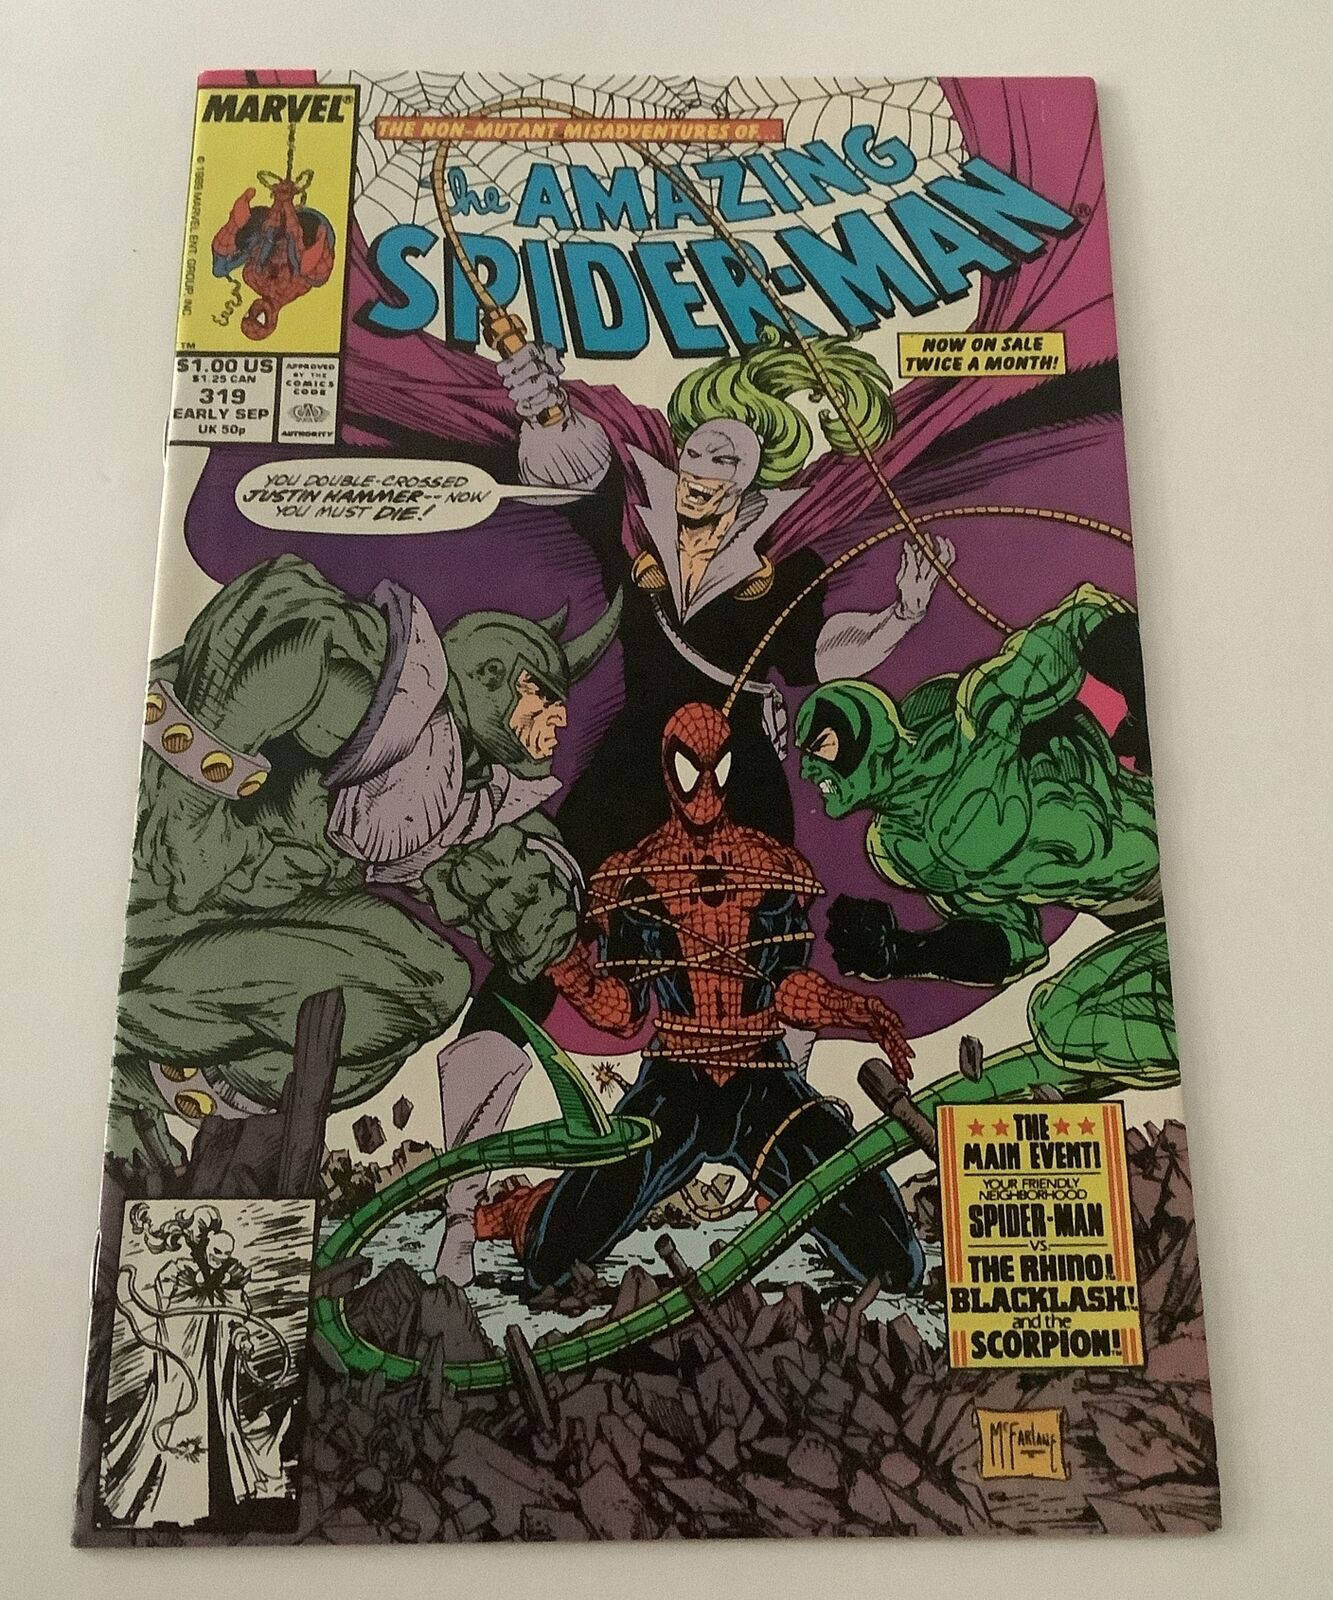 The Amazing Spider-Man #319 (Marvel Comics Early September 1989)